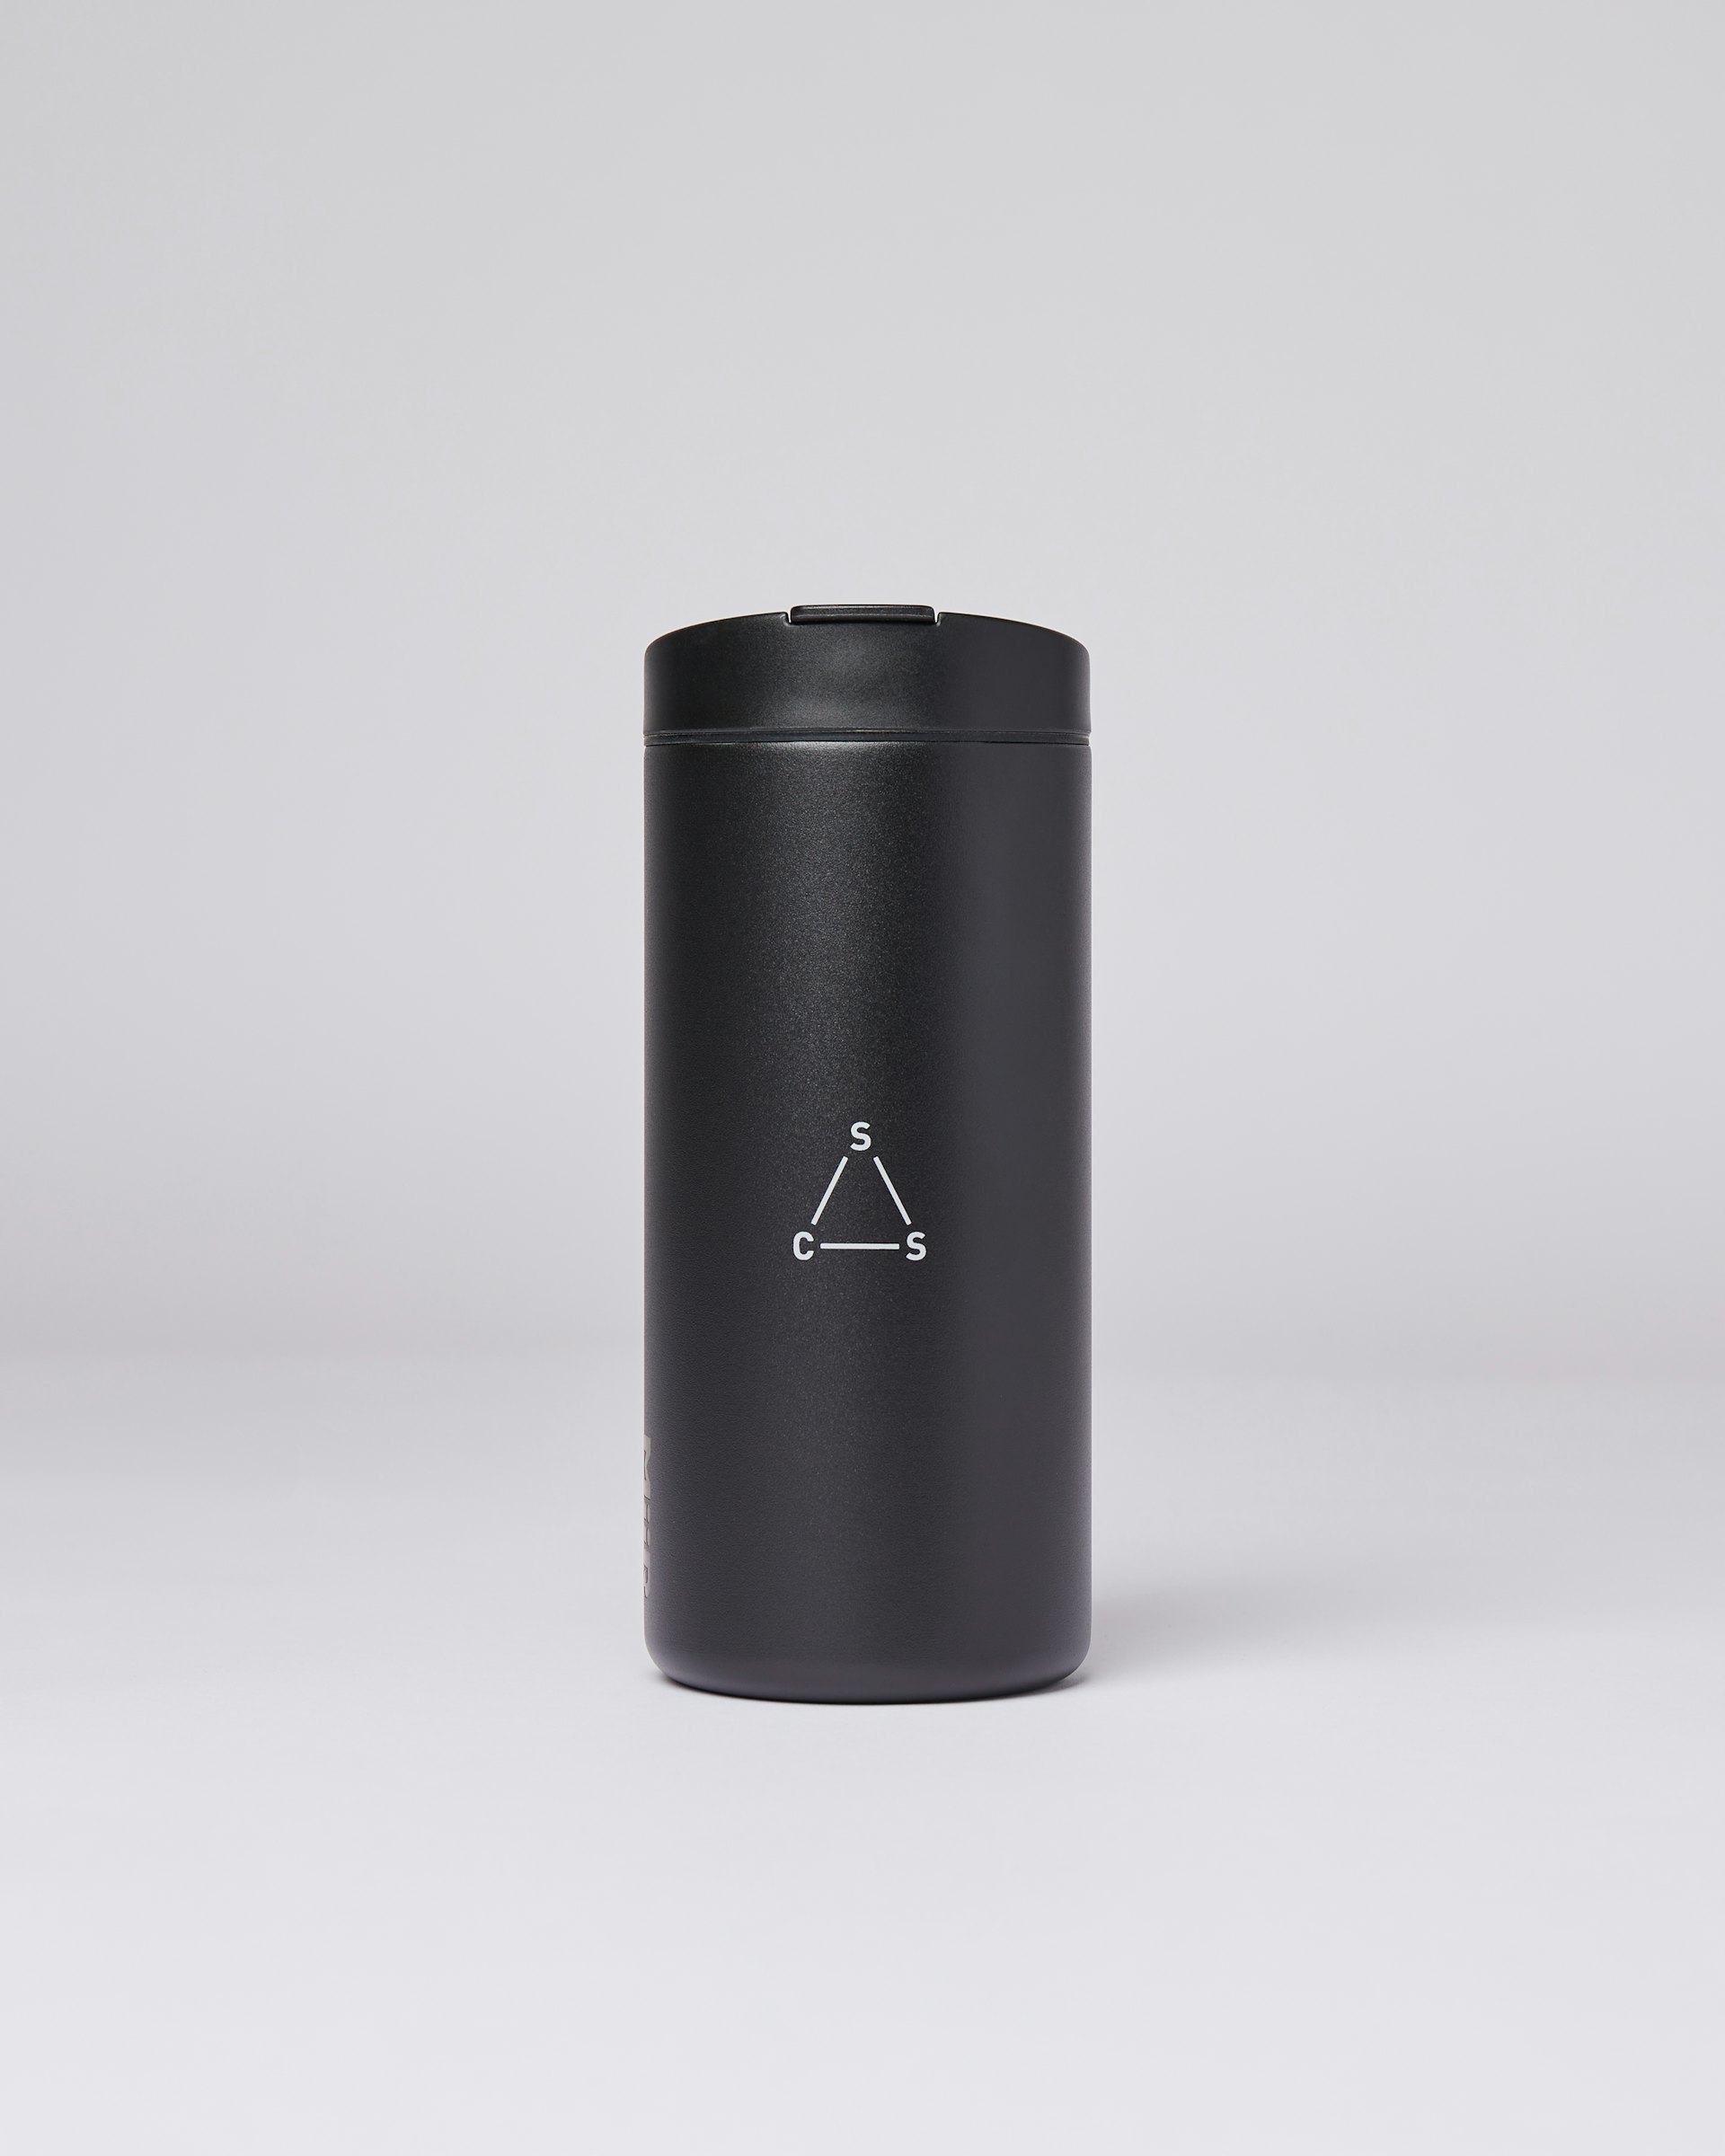 12oz Travel Tumbler belongs to the category Items and is in color black